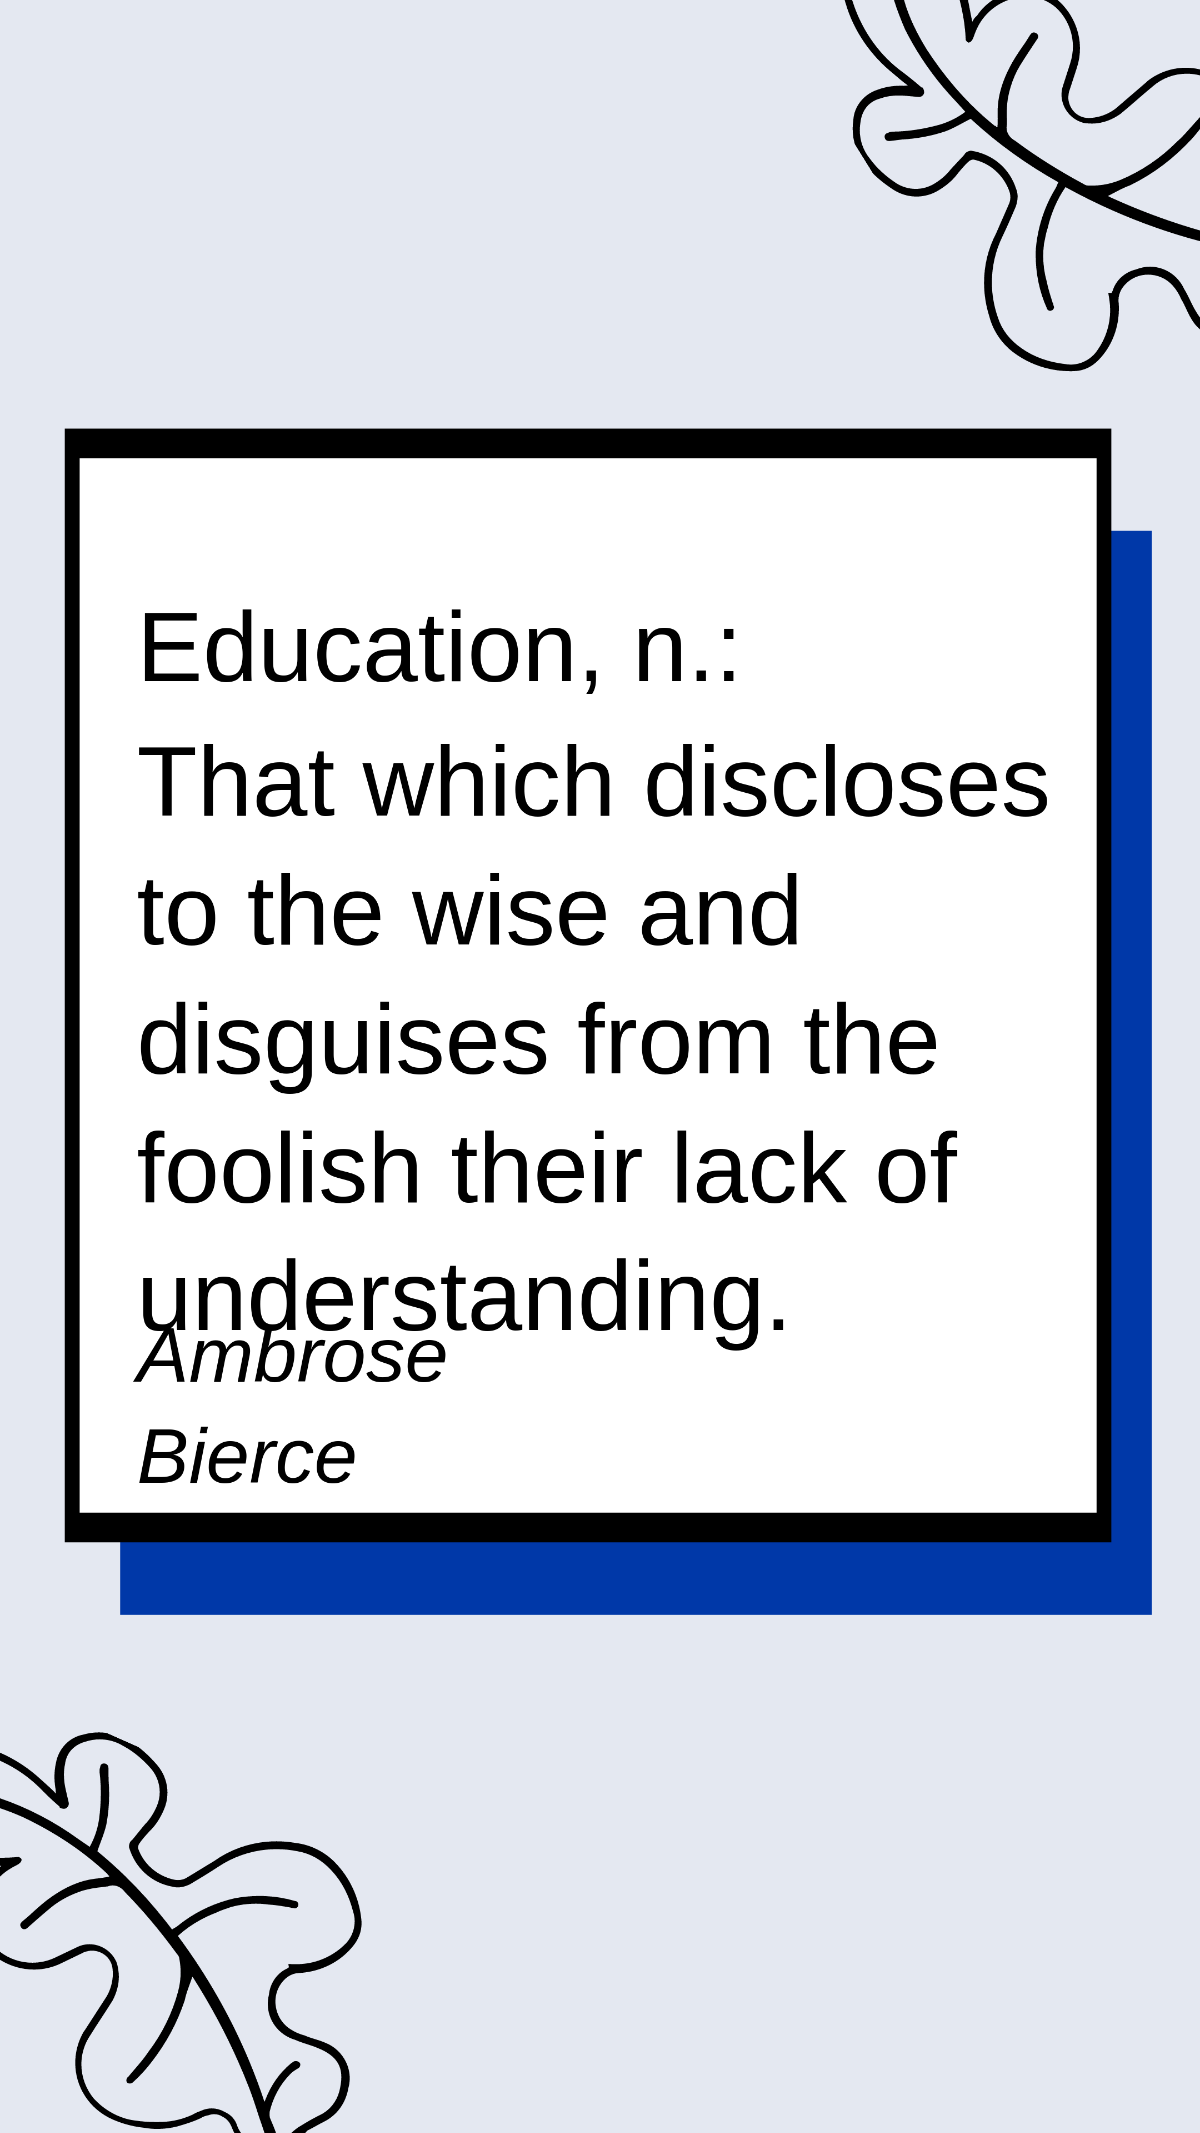 Ambrose Bierce - Education, n.: That which discloses to the wise and disguises from the foolish their lack of understanding. Template